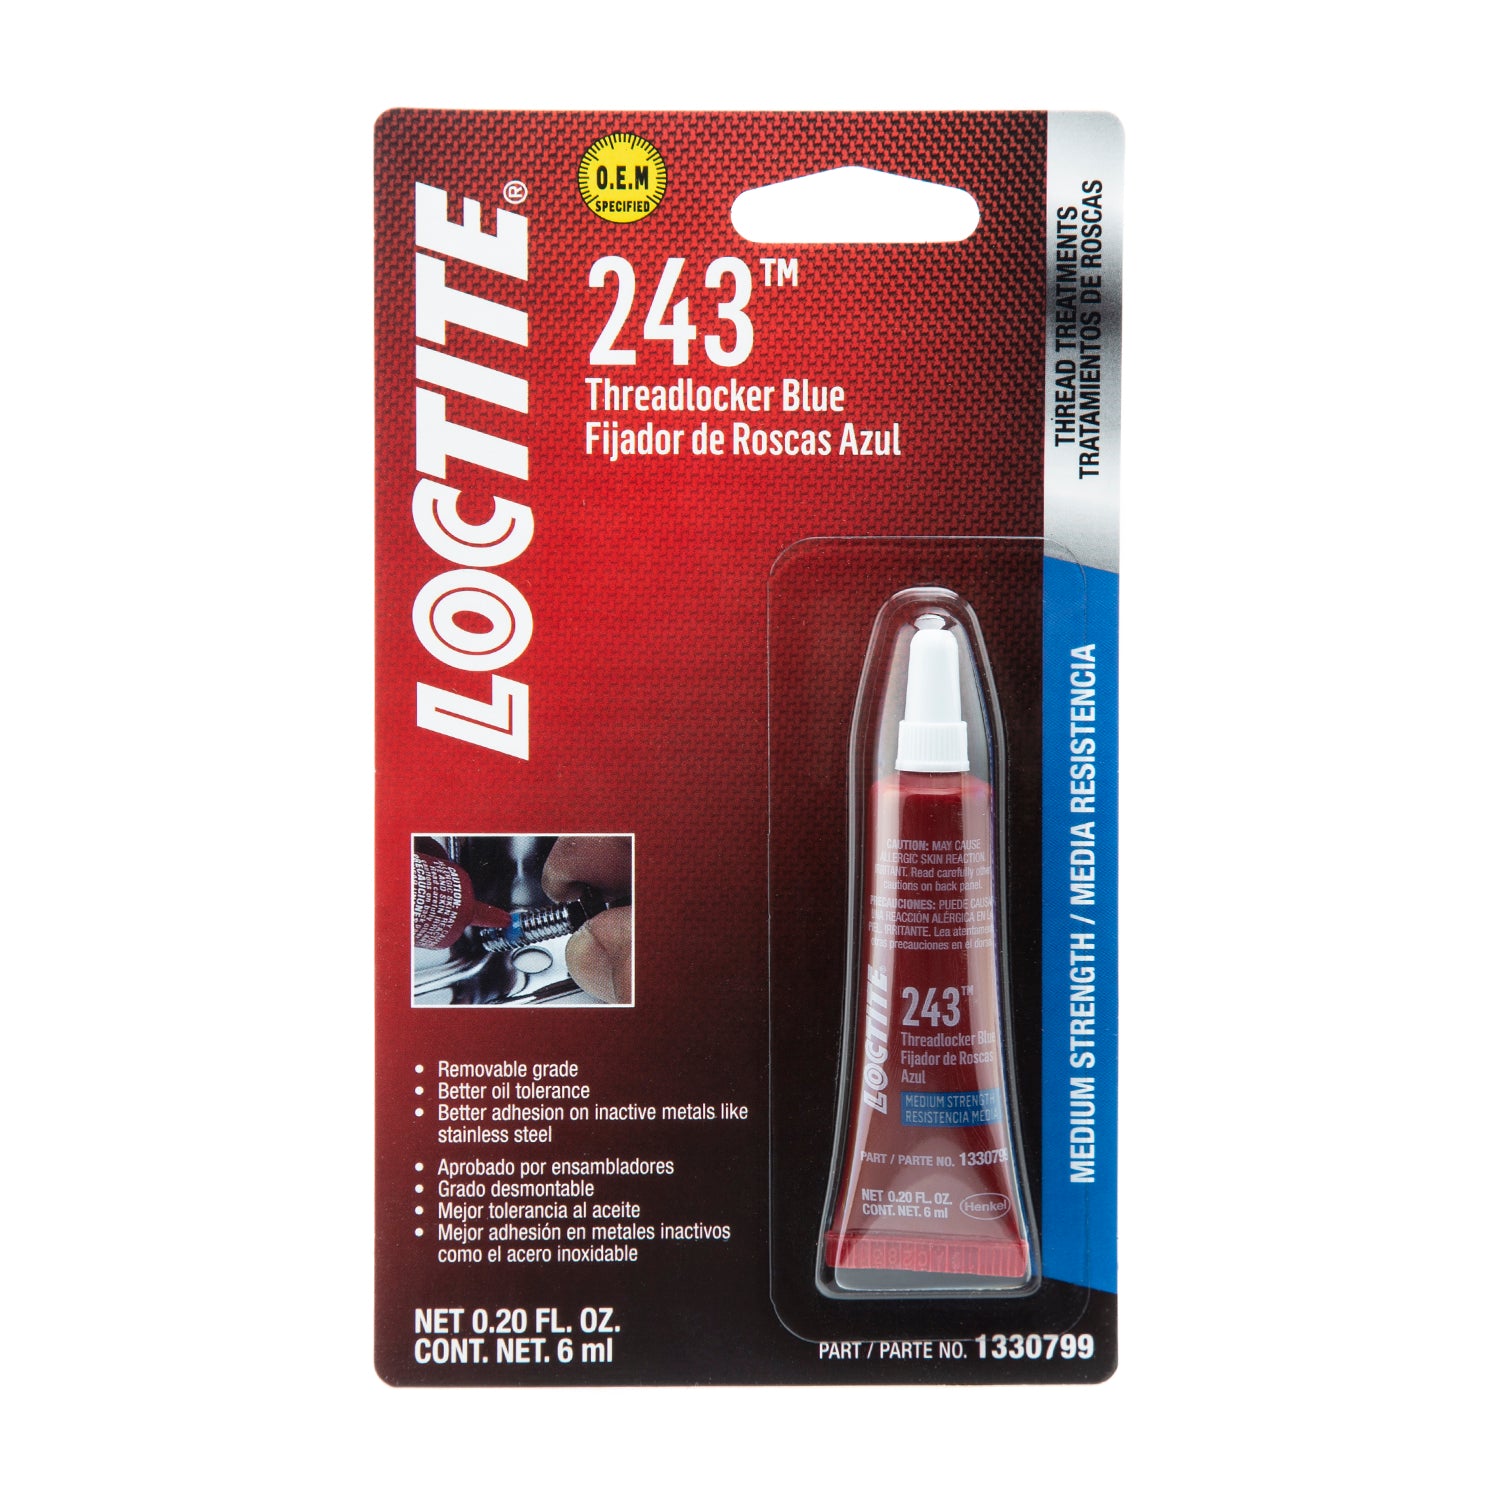 Loctite 243 - Double Pack - 2 x 5 ml